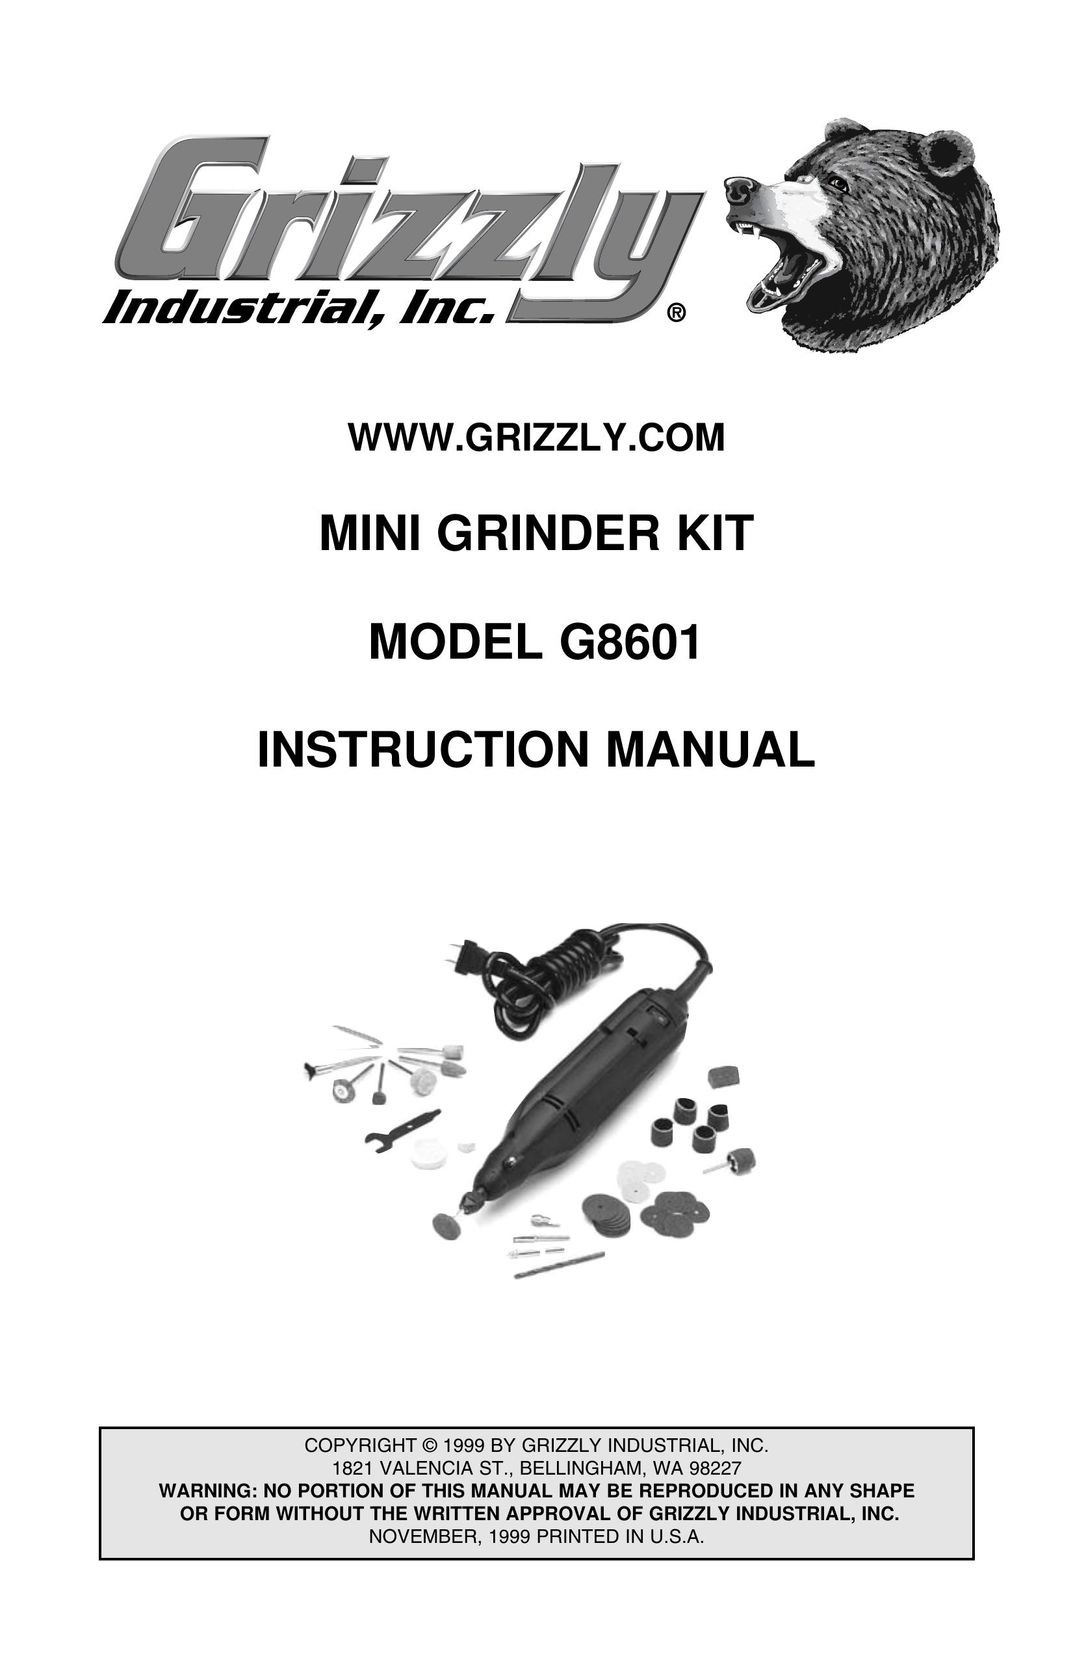 Grizzly G8601 Grinder User Manual